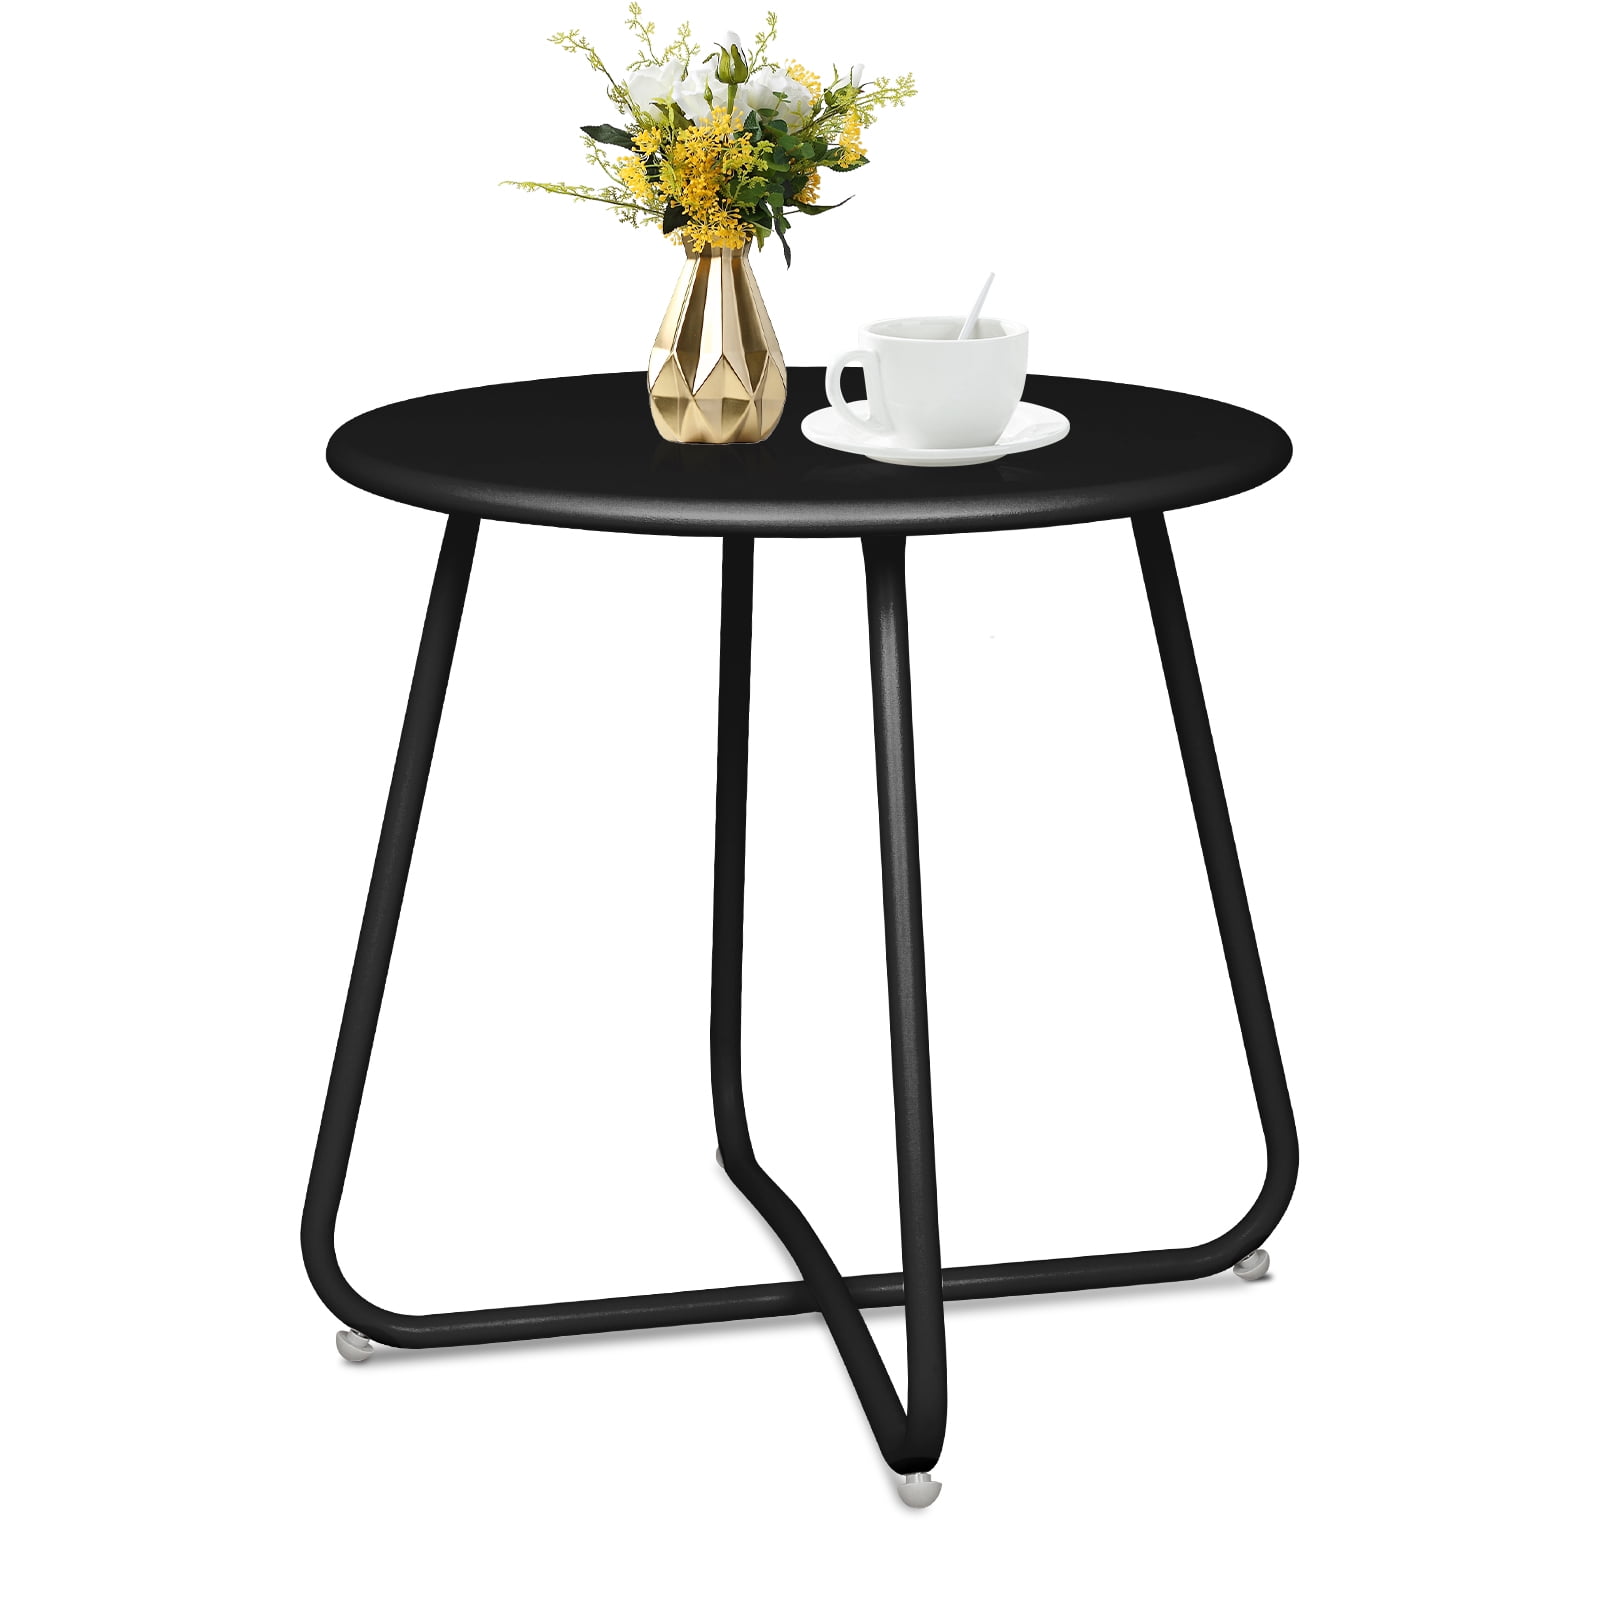 Ecomex Round Metal Side Table, End Table, Small Patio Coffee Table for ...